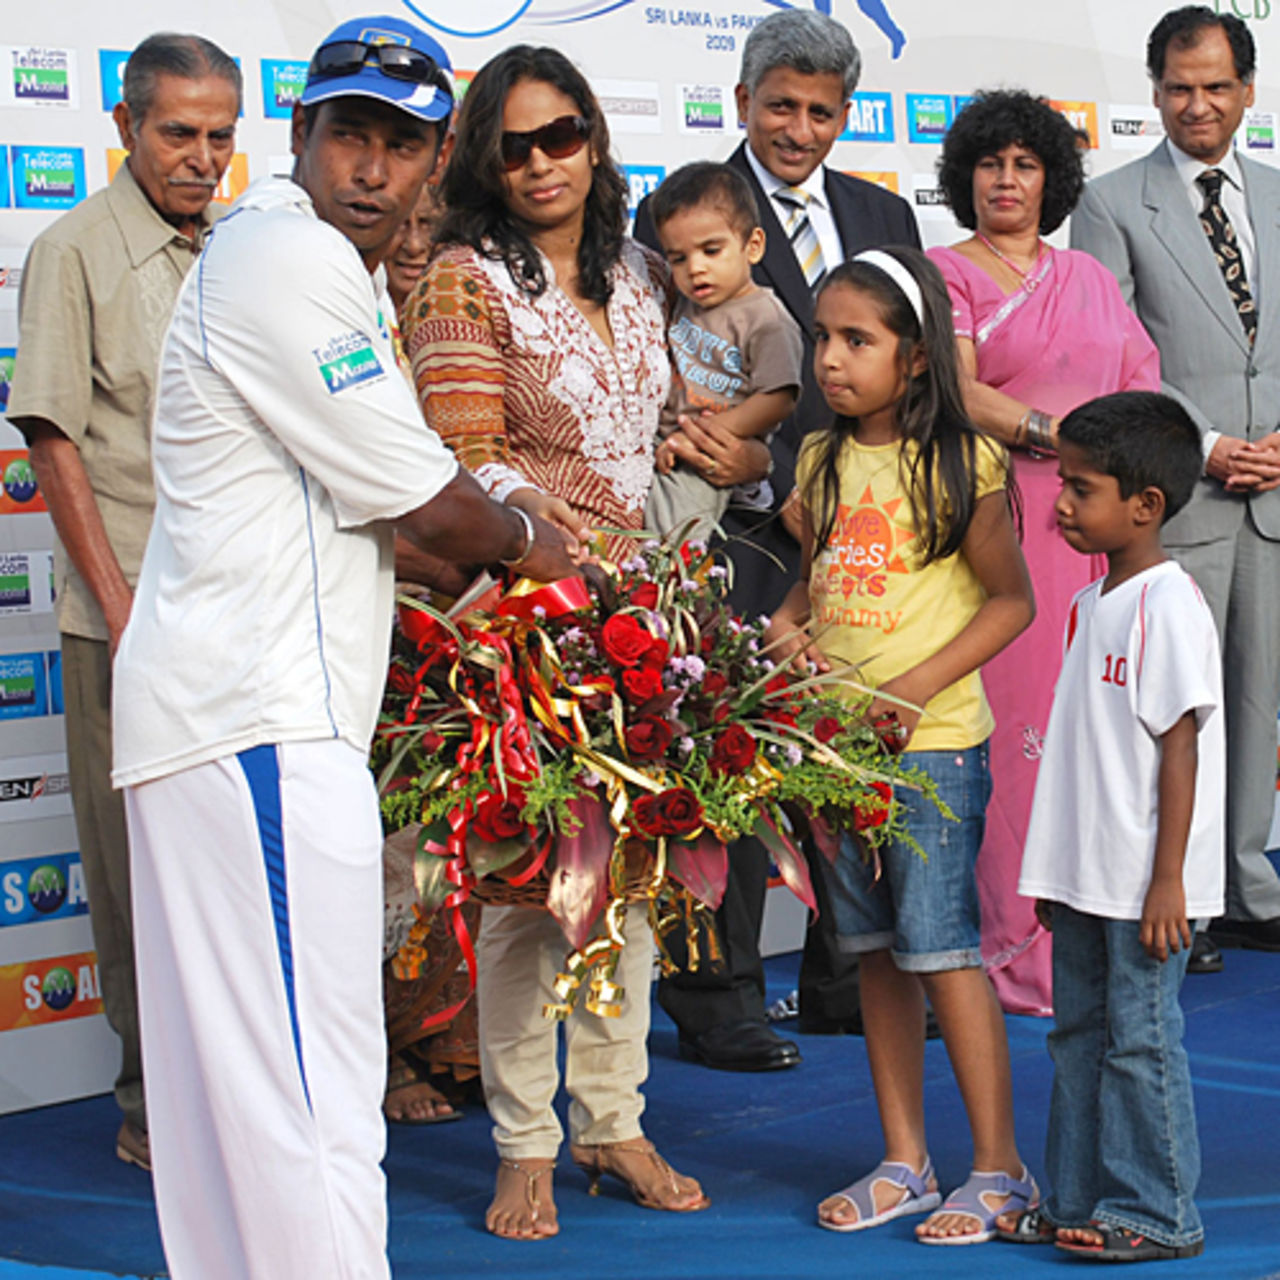 Chaminda Vaas's family presents him with a bouquet, Sri Lanka v Pakistan, 3rd Test, Colombo, 5th day, July 24, 2009